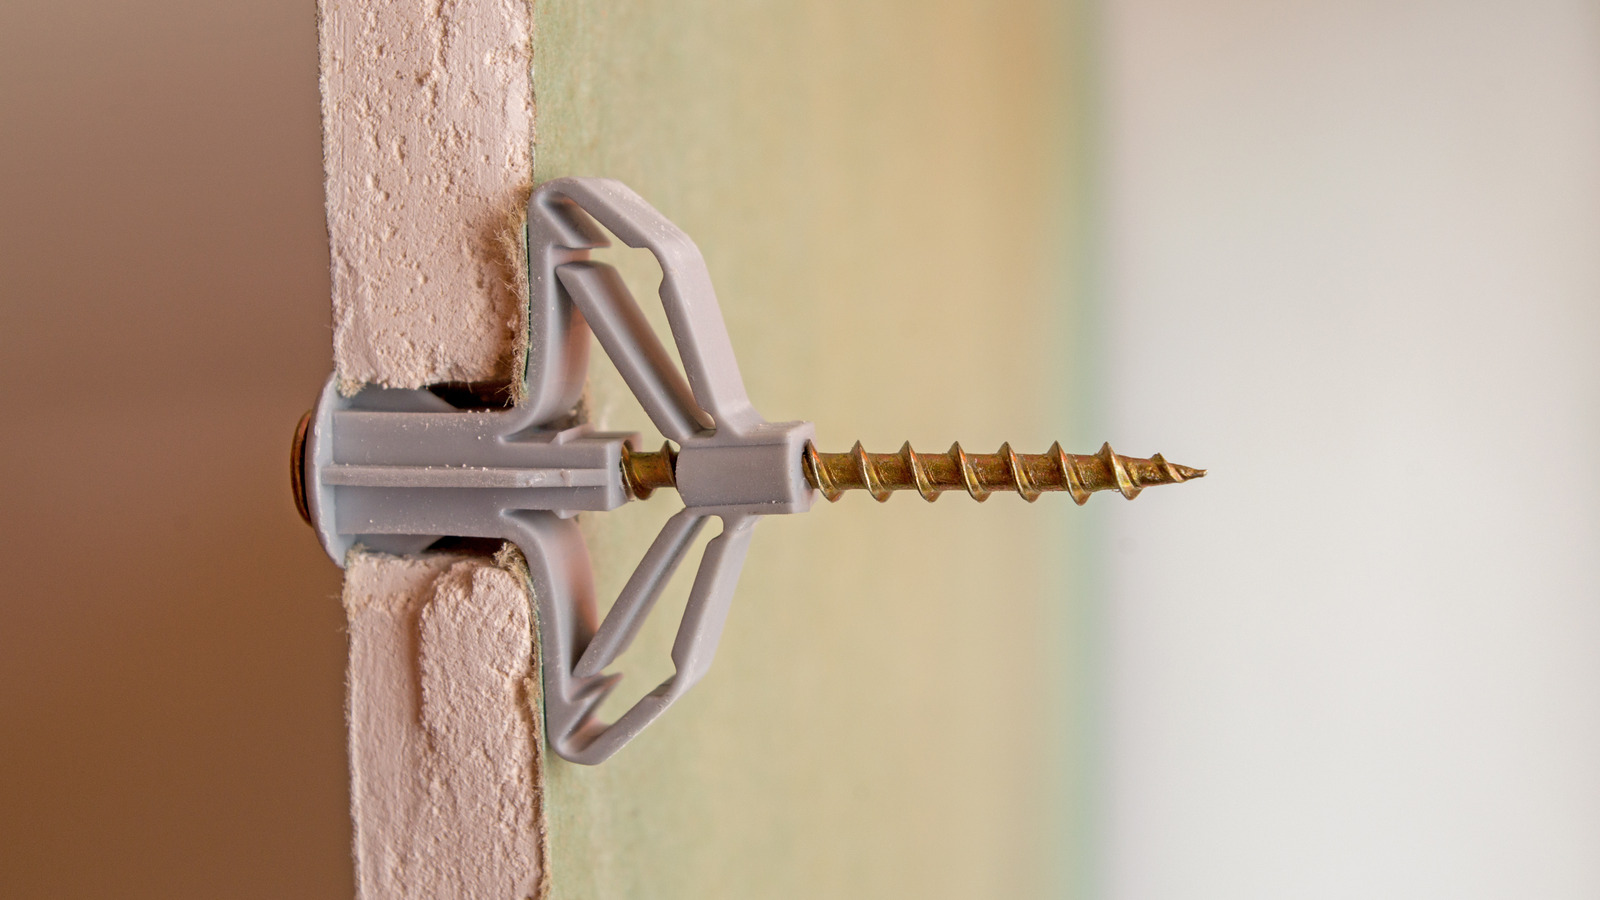 What You Should Know About The 8 Types Of Drywall Anchors